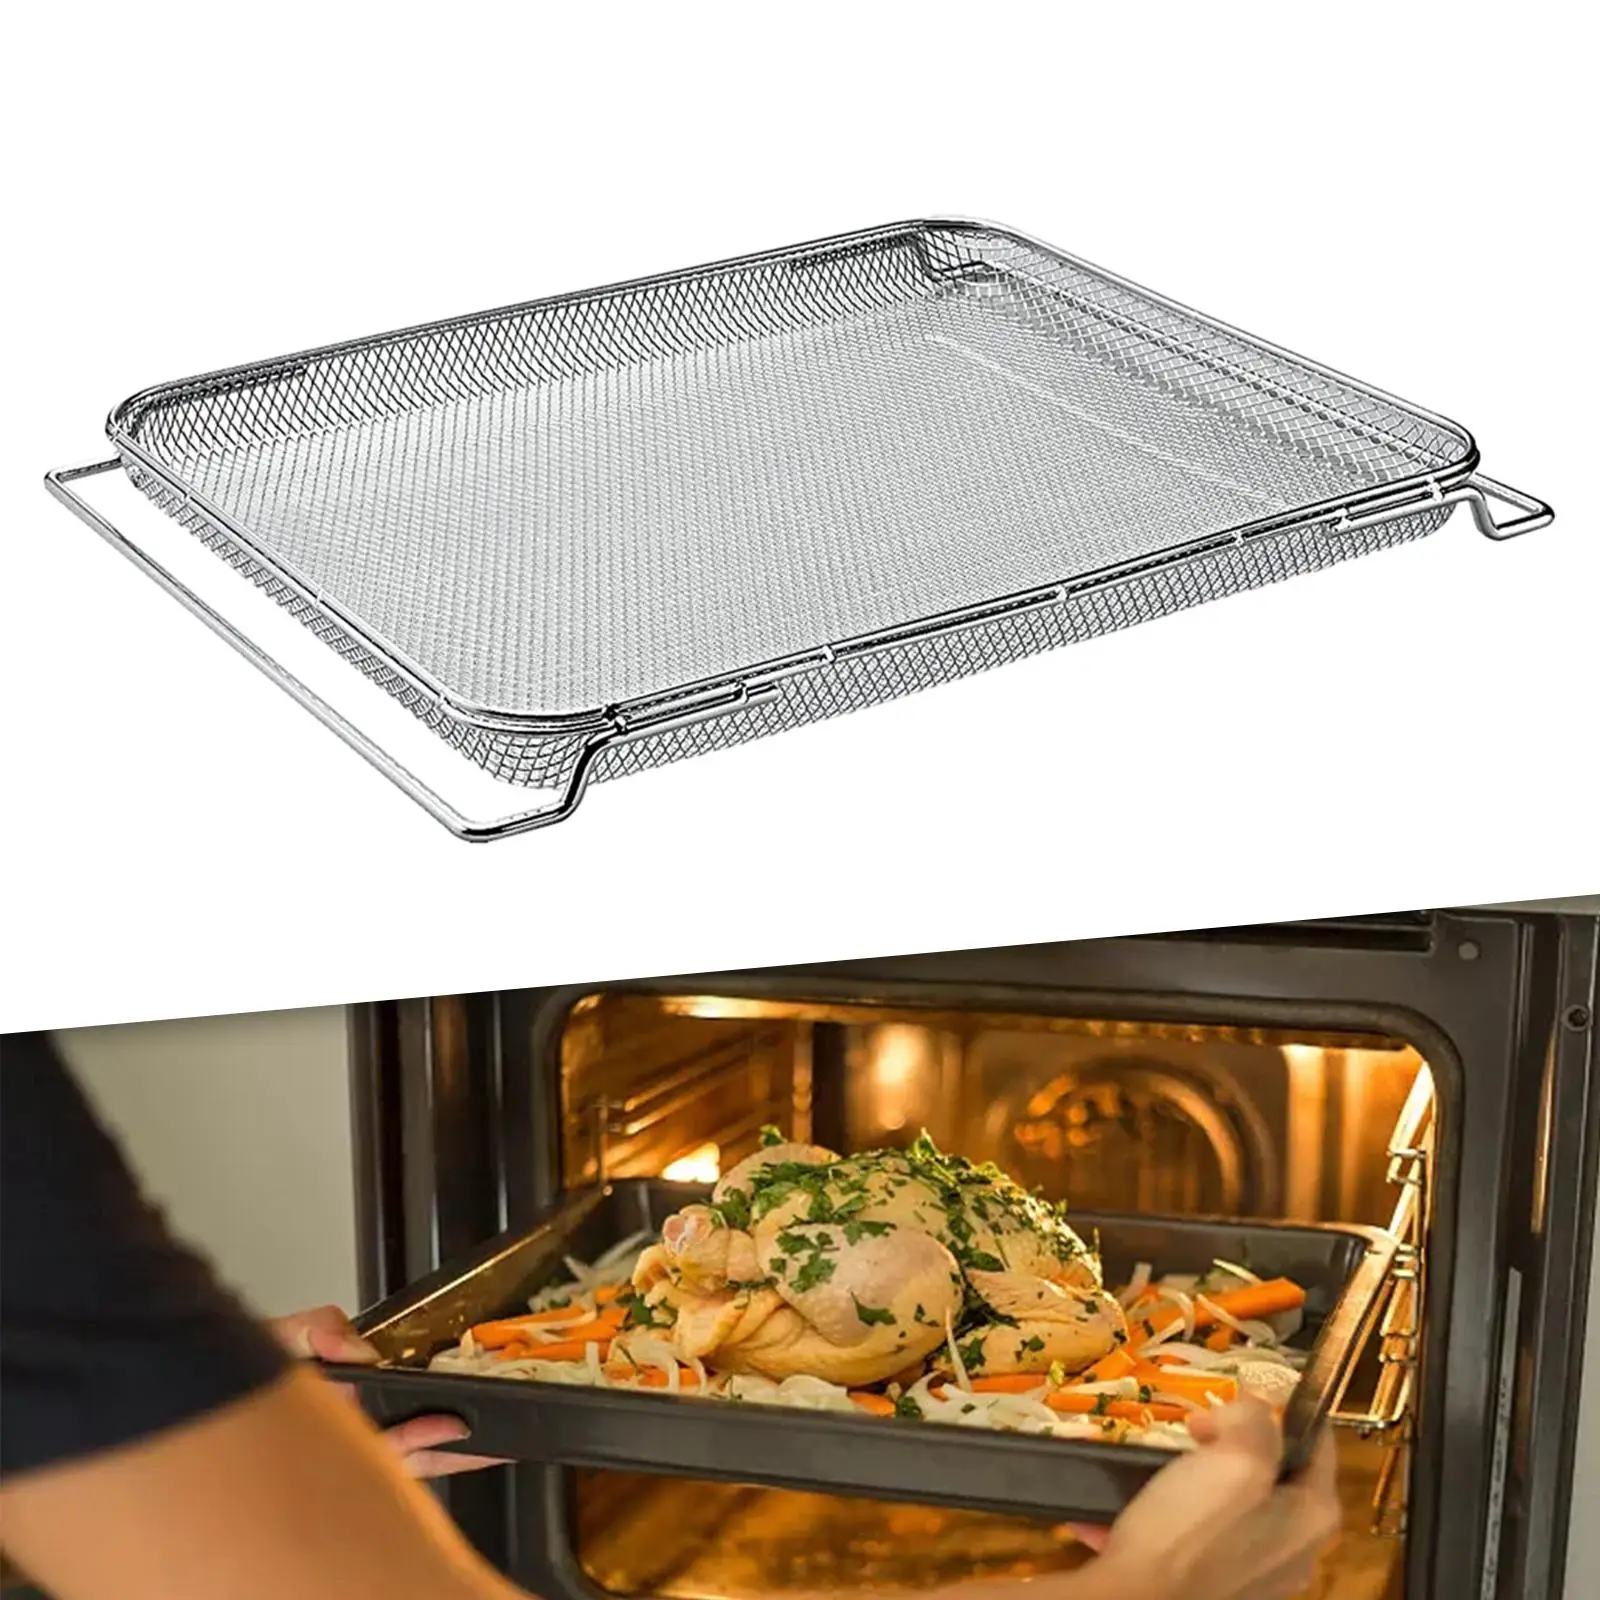 Oven Grill Mesh Replacement Basket with Handles 36.7cmx28.6cm Grill Mesh Basket Oven Baking Tray for Bread Fries Bacons